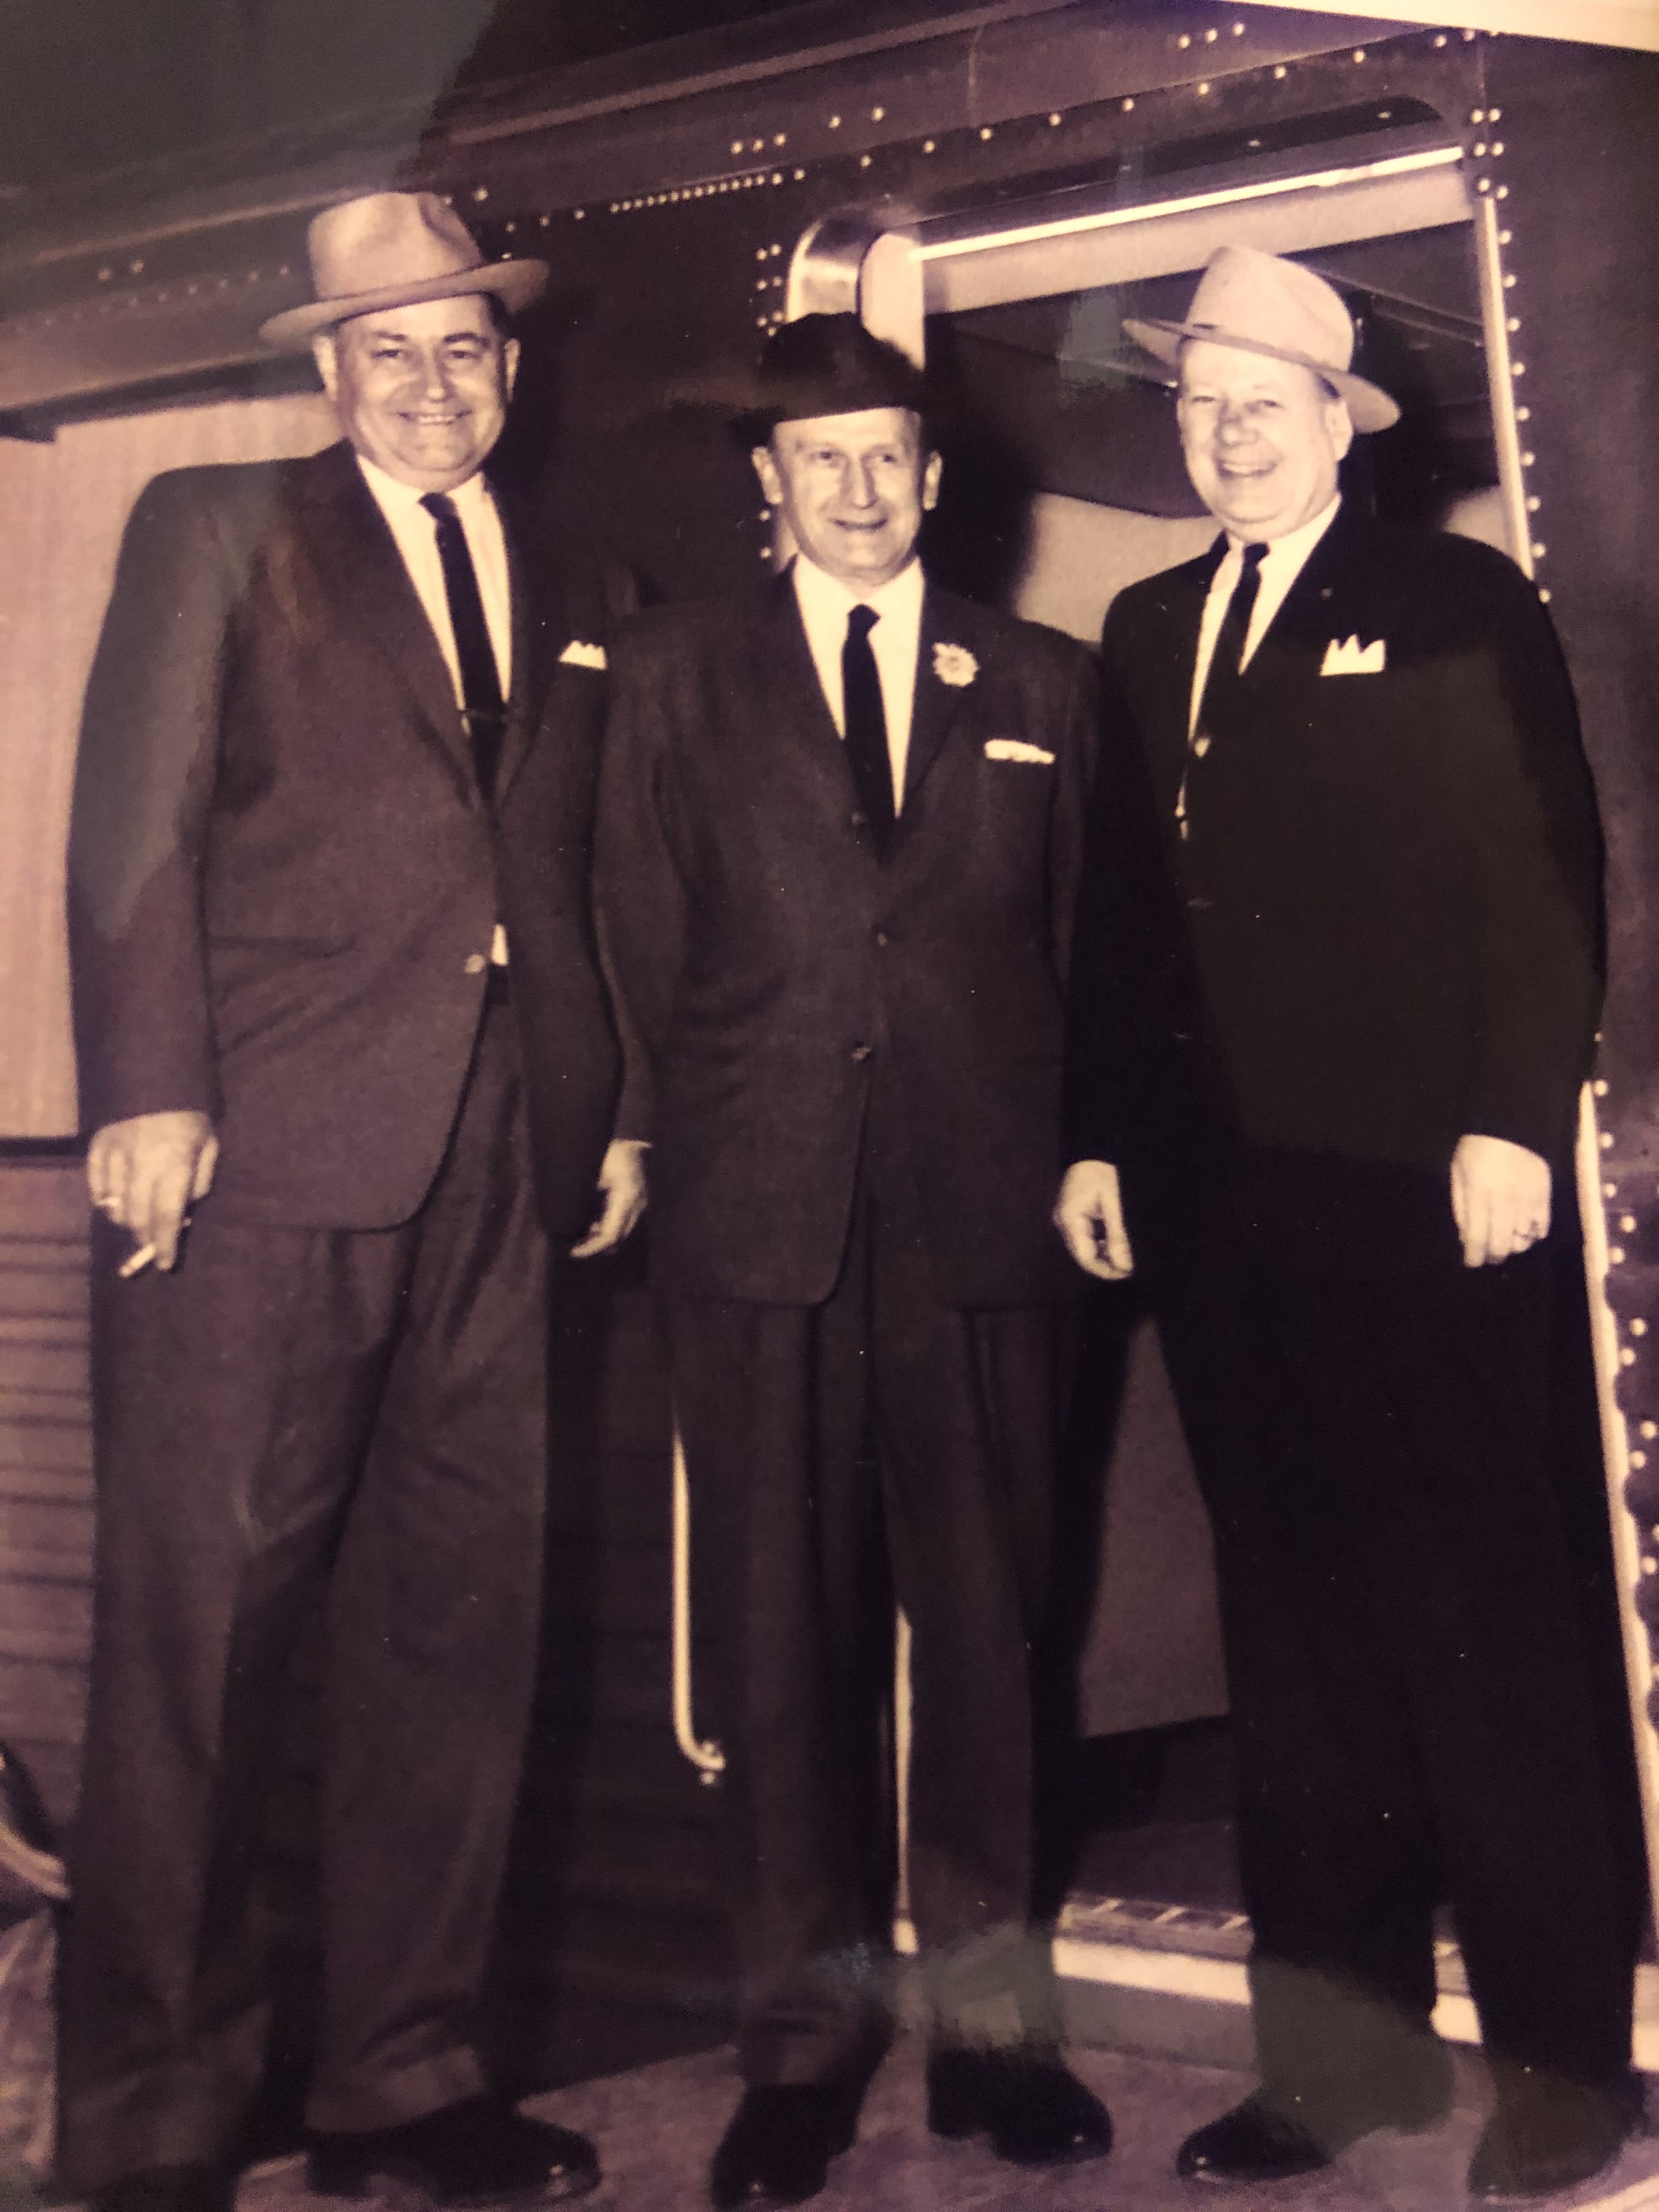 Three men in suits and hats pose in front of a train door.